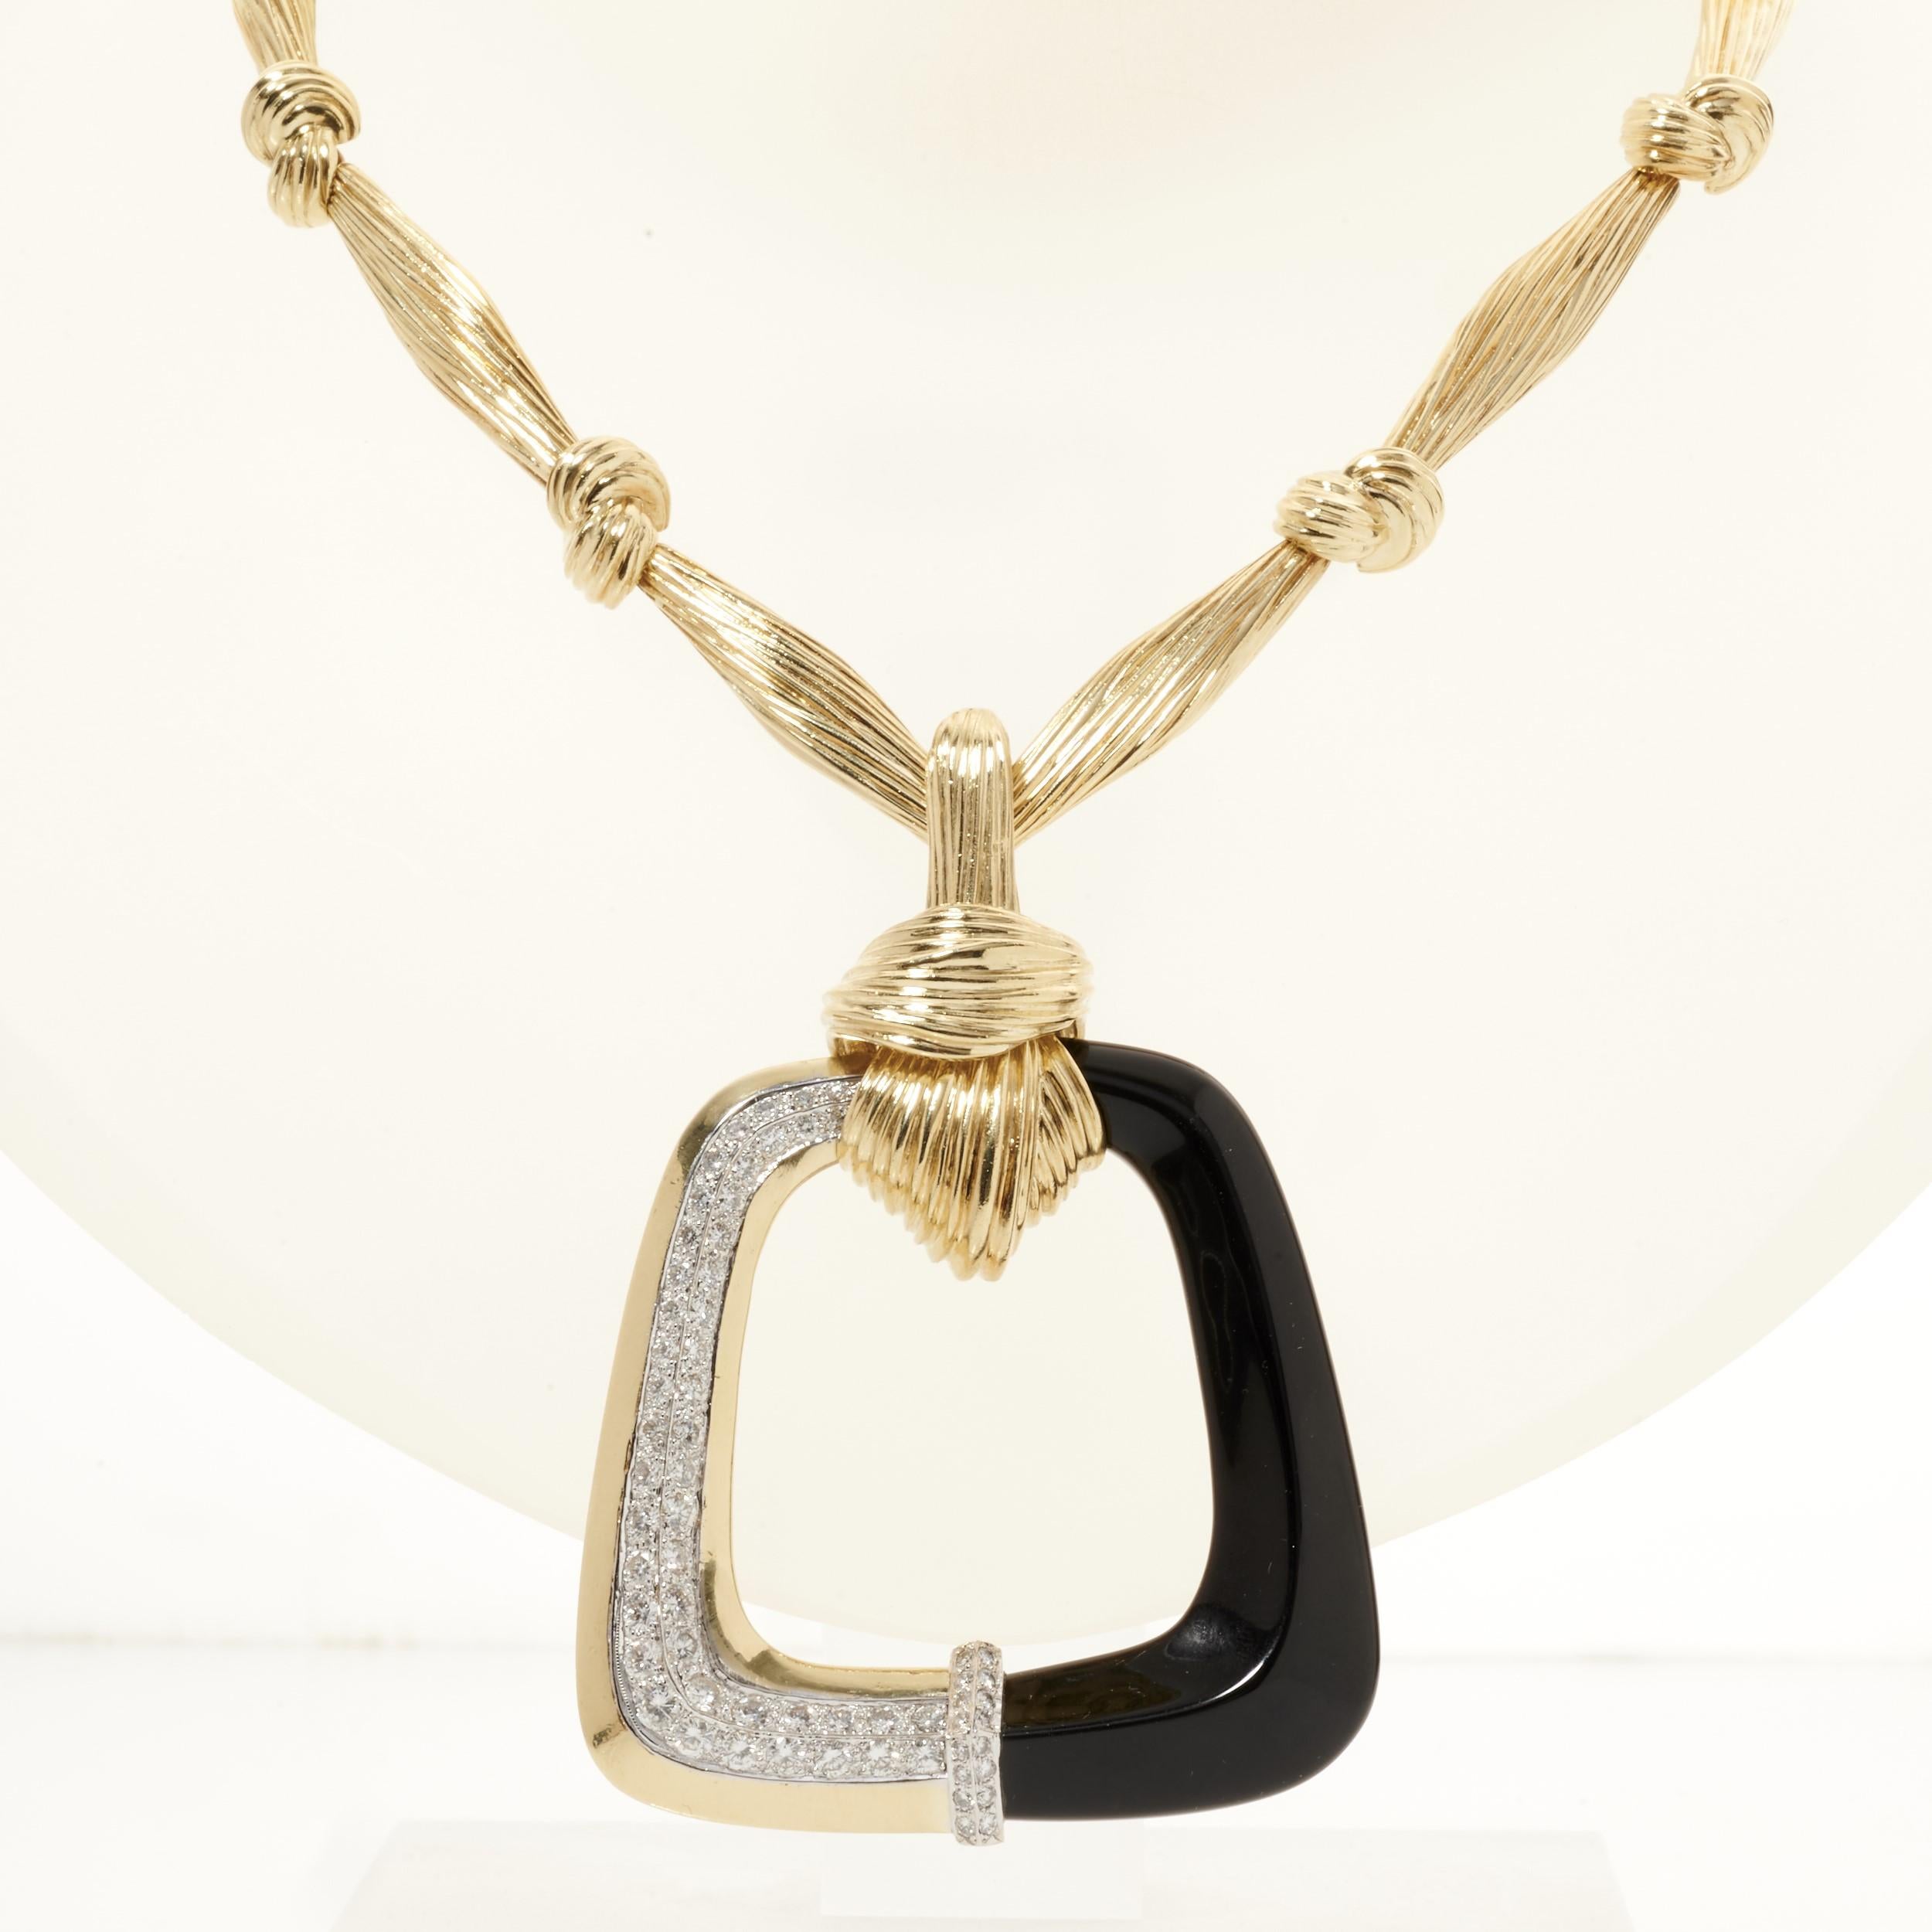 A stunning La Triomphe gold necklace with an open square pendant embellished with mesmerizing black onyx and dazzling diamonds. 

The pendant is made of 18k yellow gold, black onyx, and 62 round diamonds. They weigh approximately 2.50 carats and